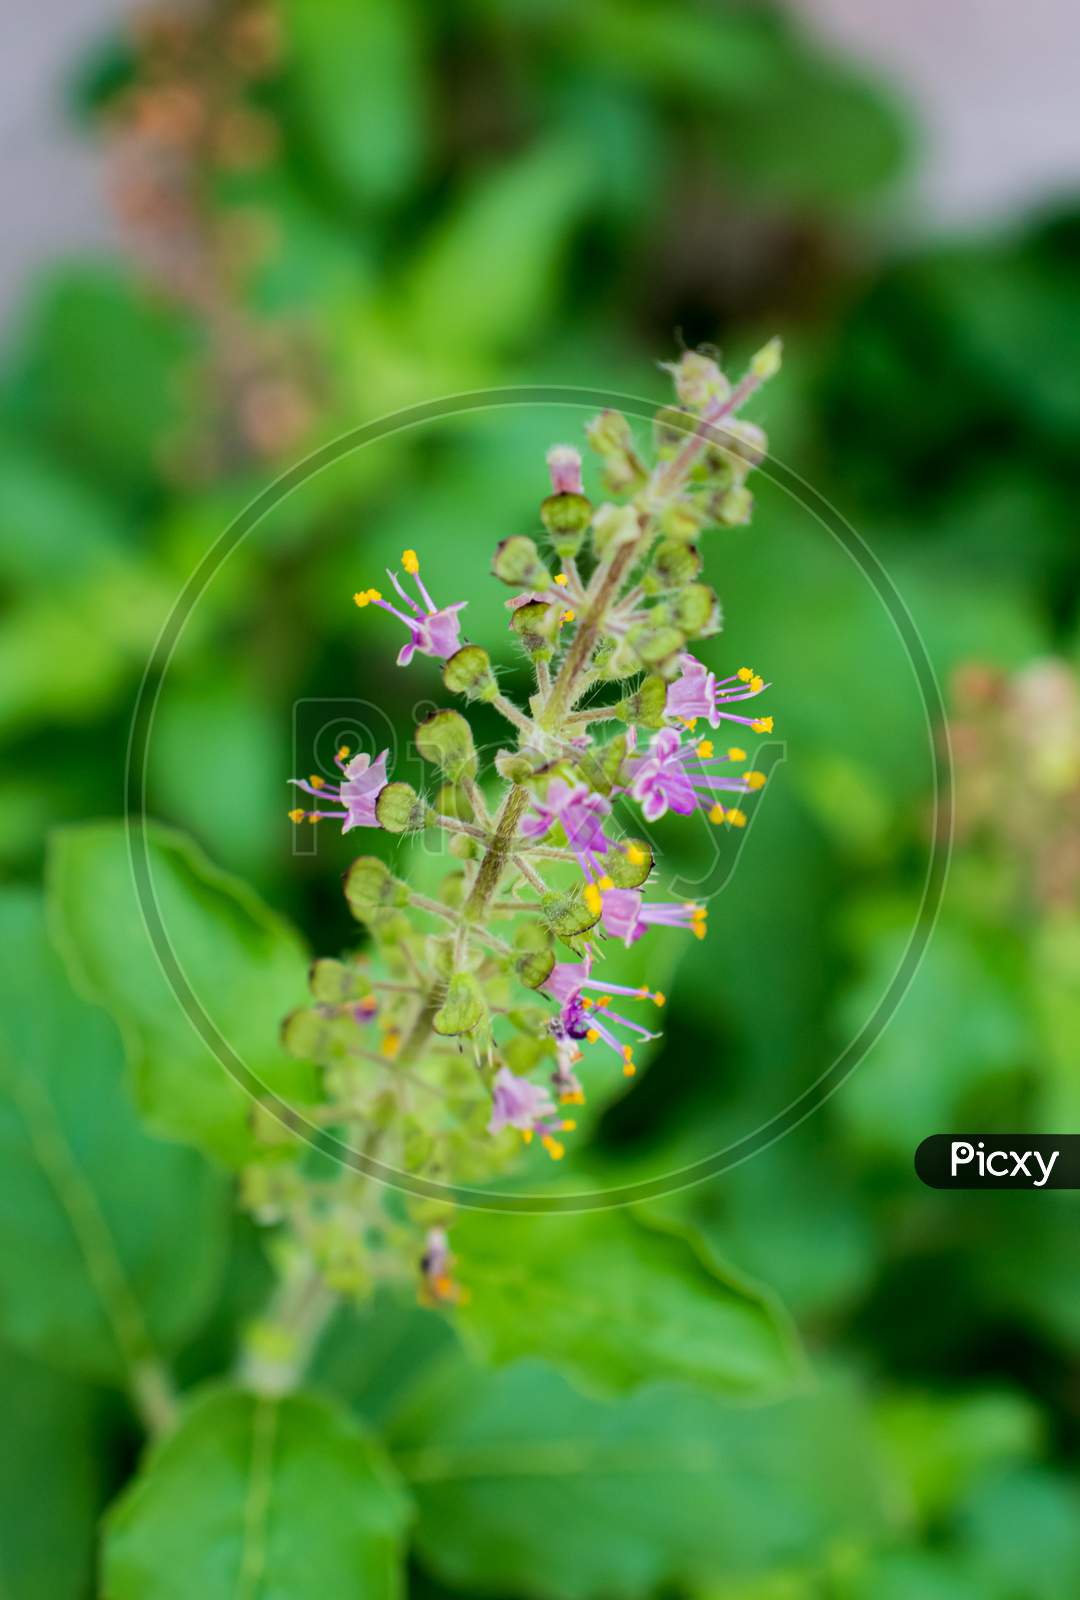 Basil Plant Flower Showing Mature Flowers With Pollen Grains.